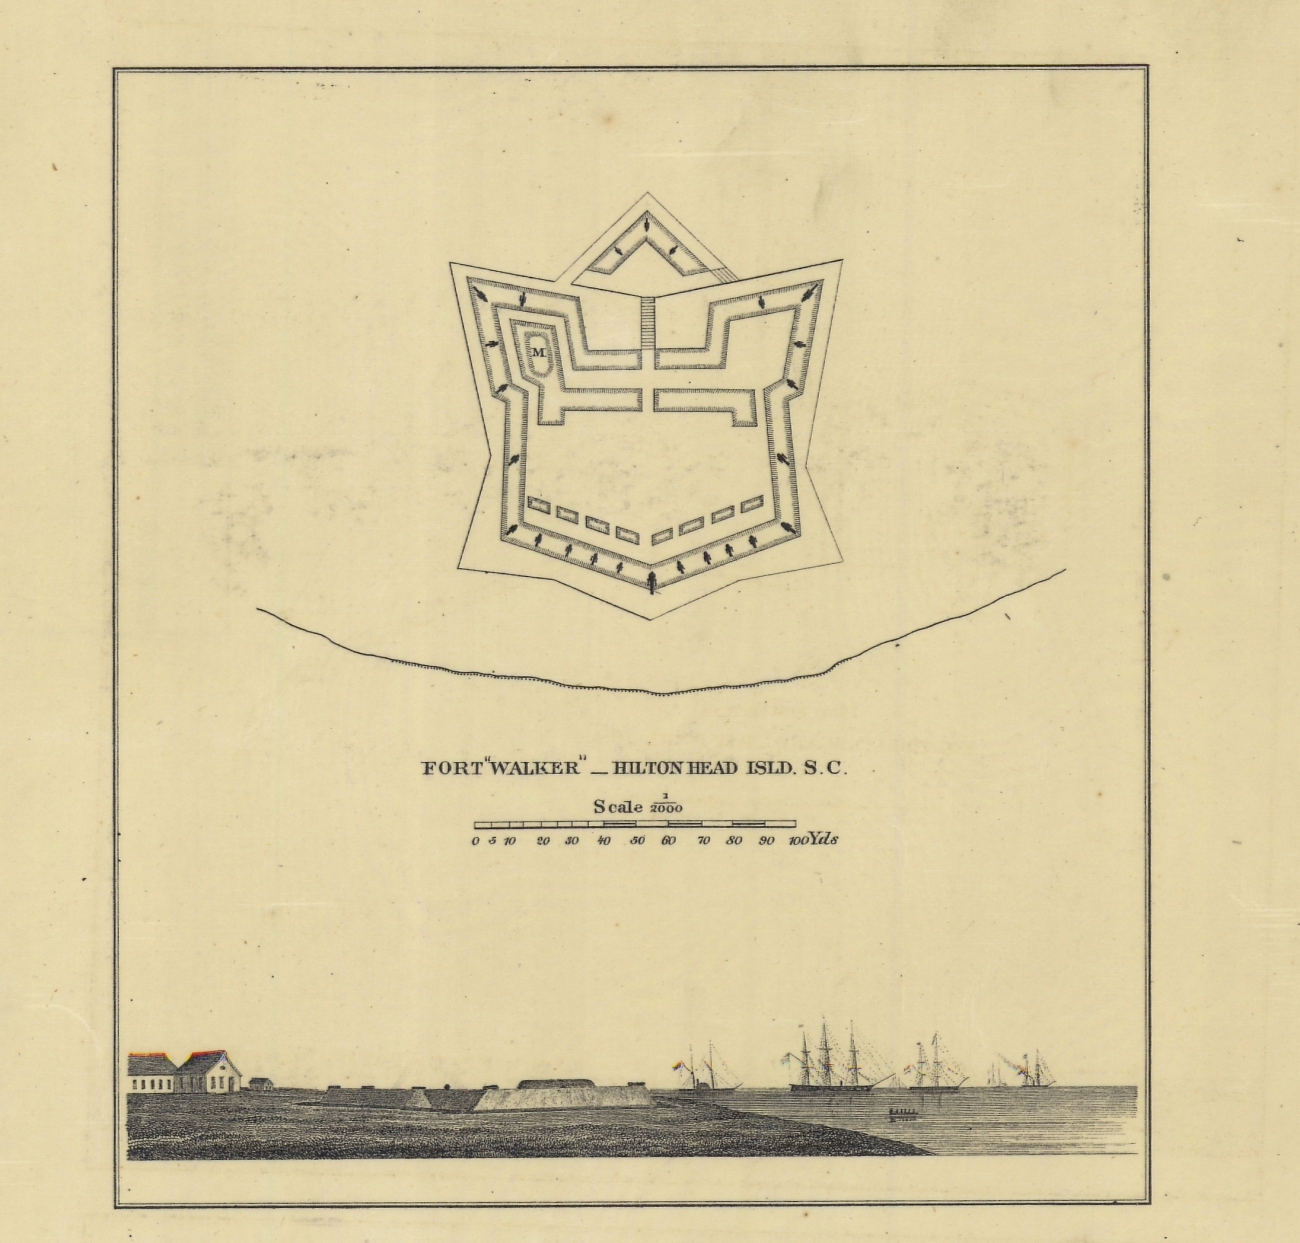 Published view of Fort Walker - Hilton Head Island, S